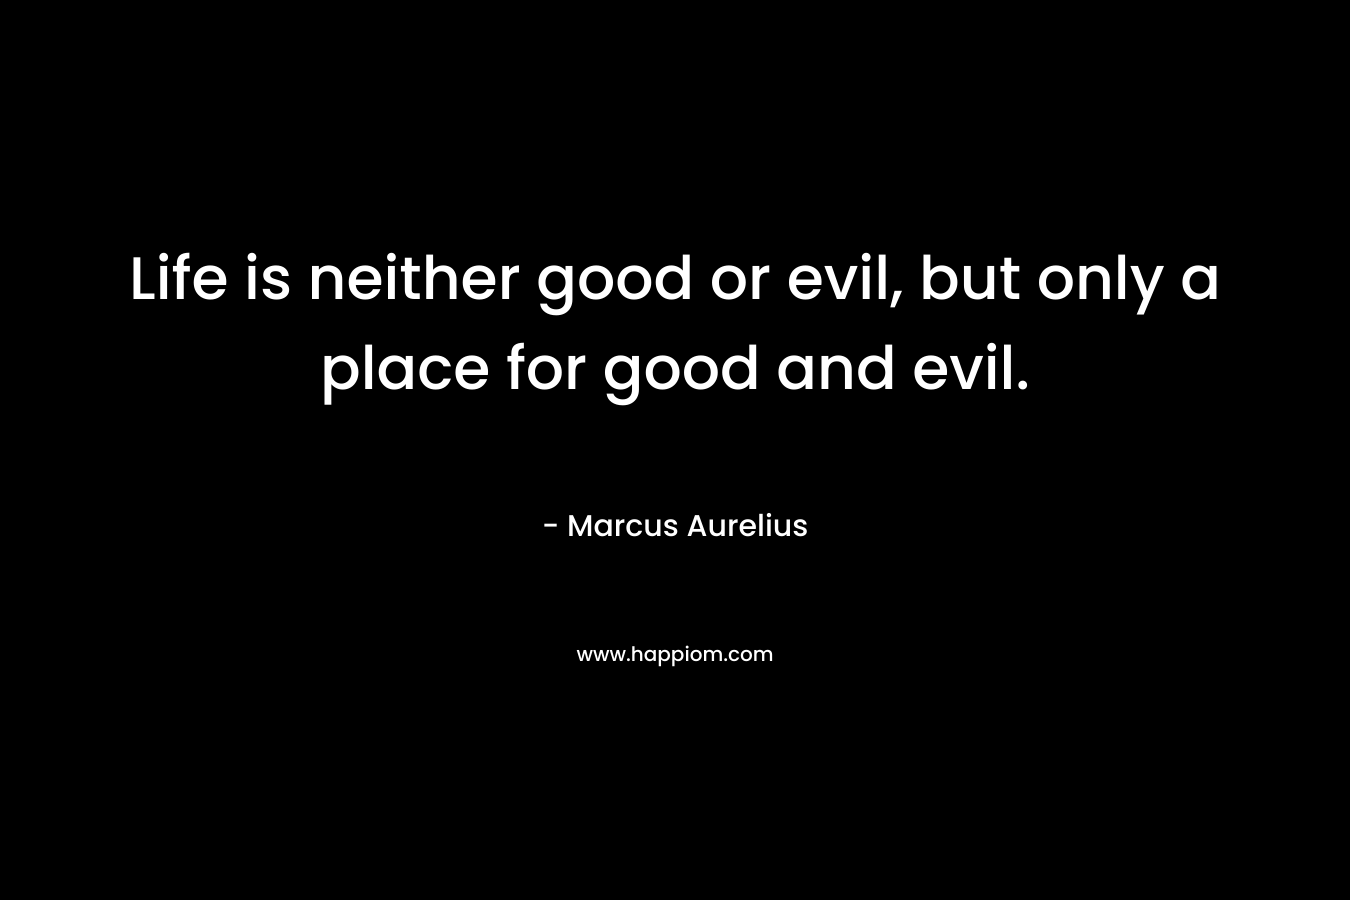 Life is neither good or evil, but only a place for good and evil.